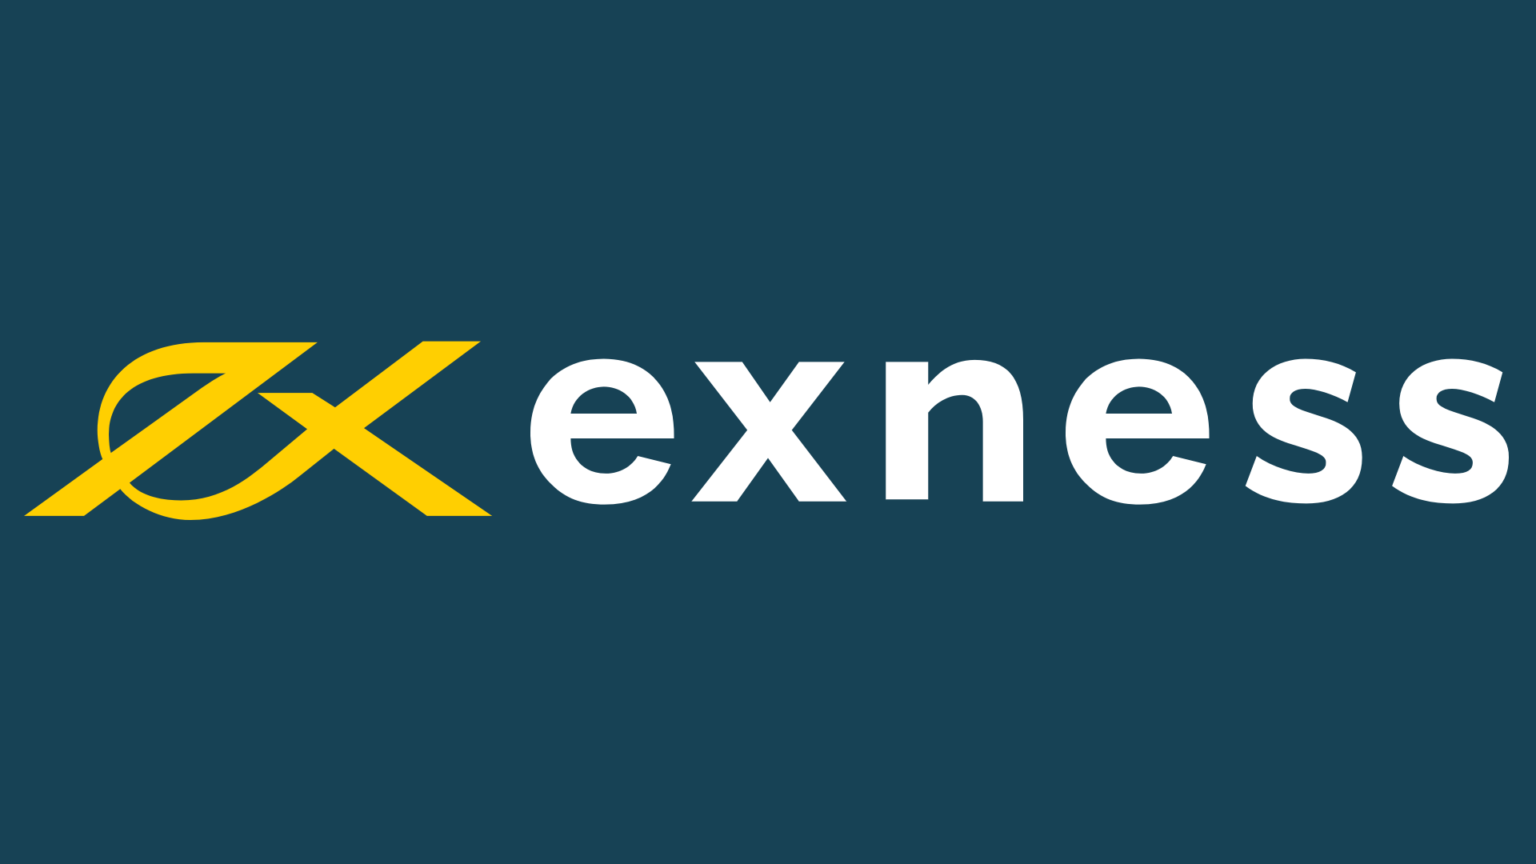 Review of Exness Forex broker - Is it a legit company?